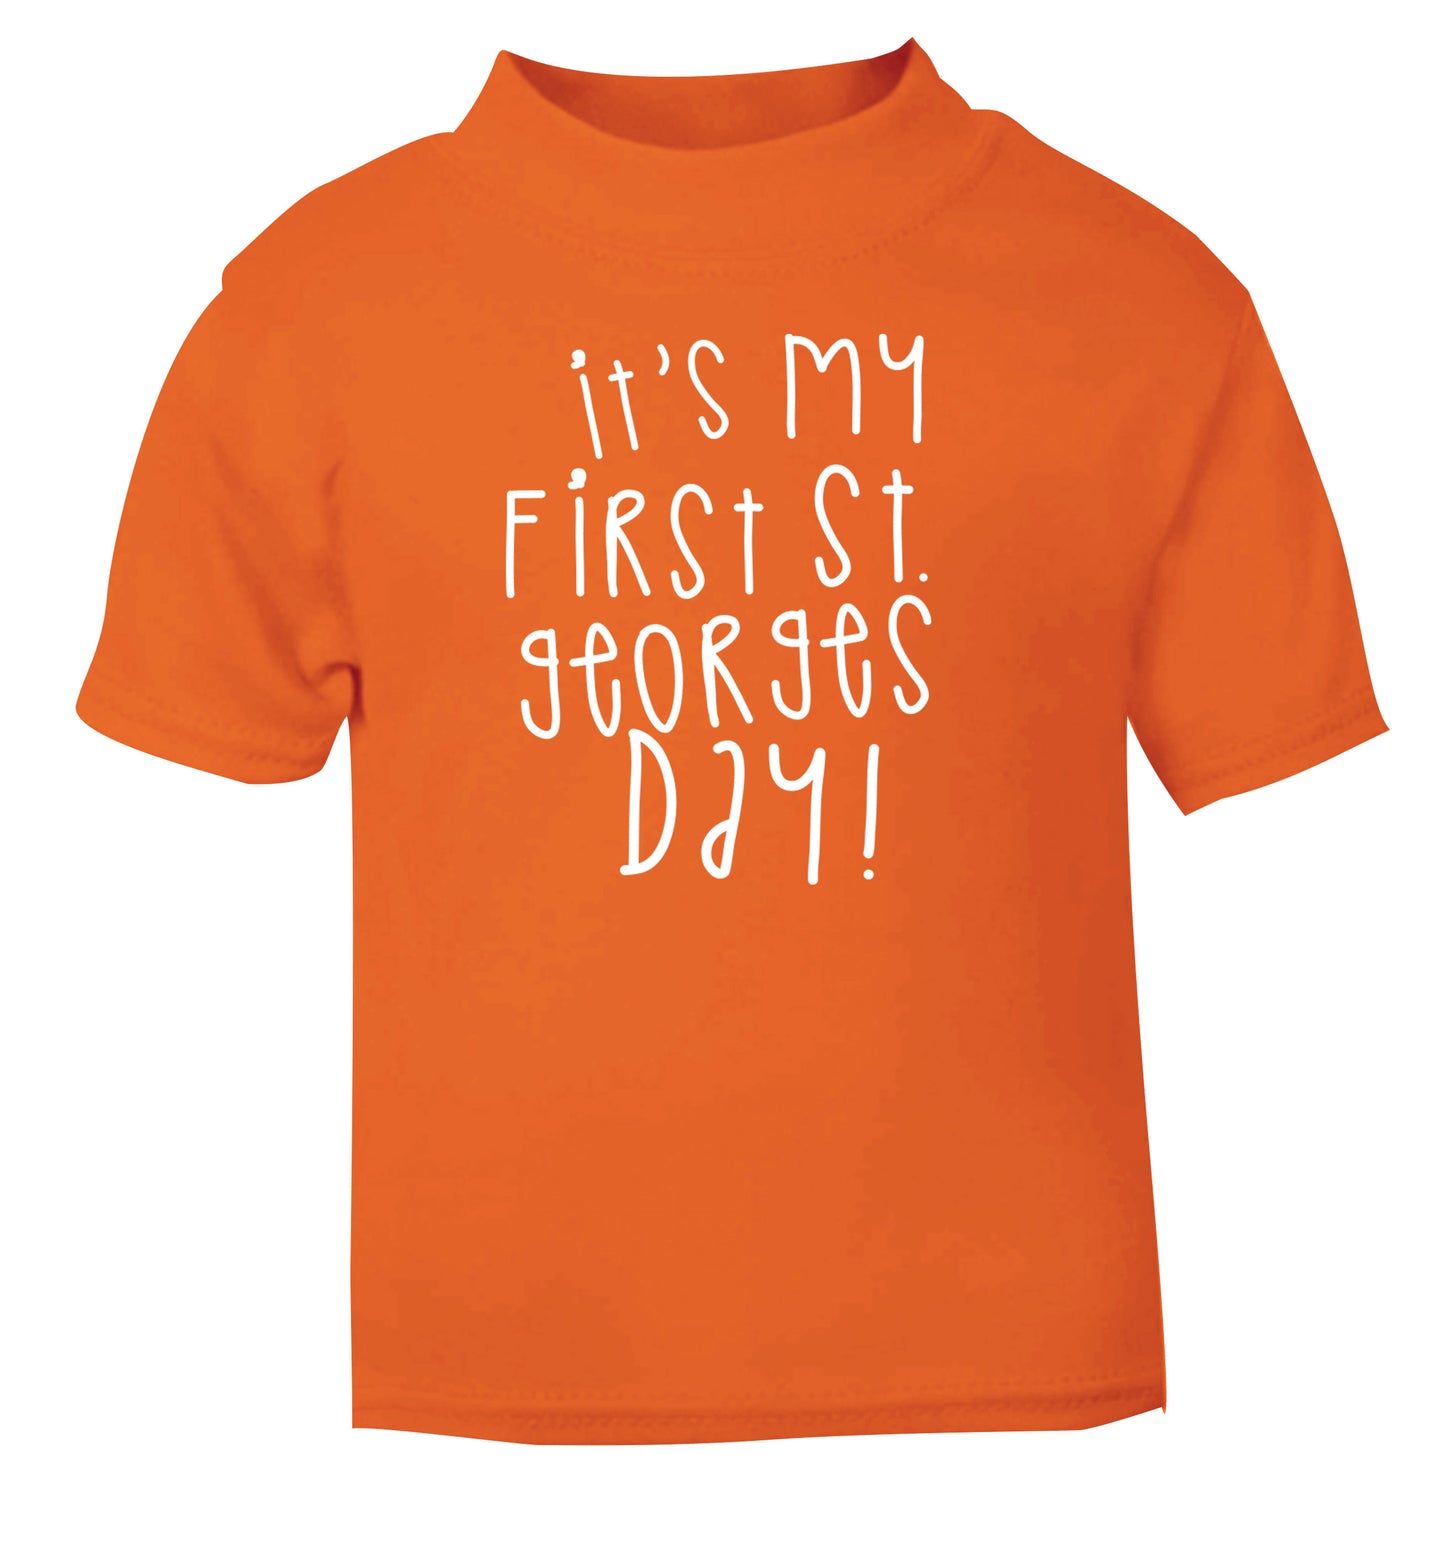 It's my first St Georges day orange Baby Toddler Tshirt 2 Years